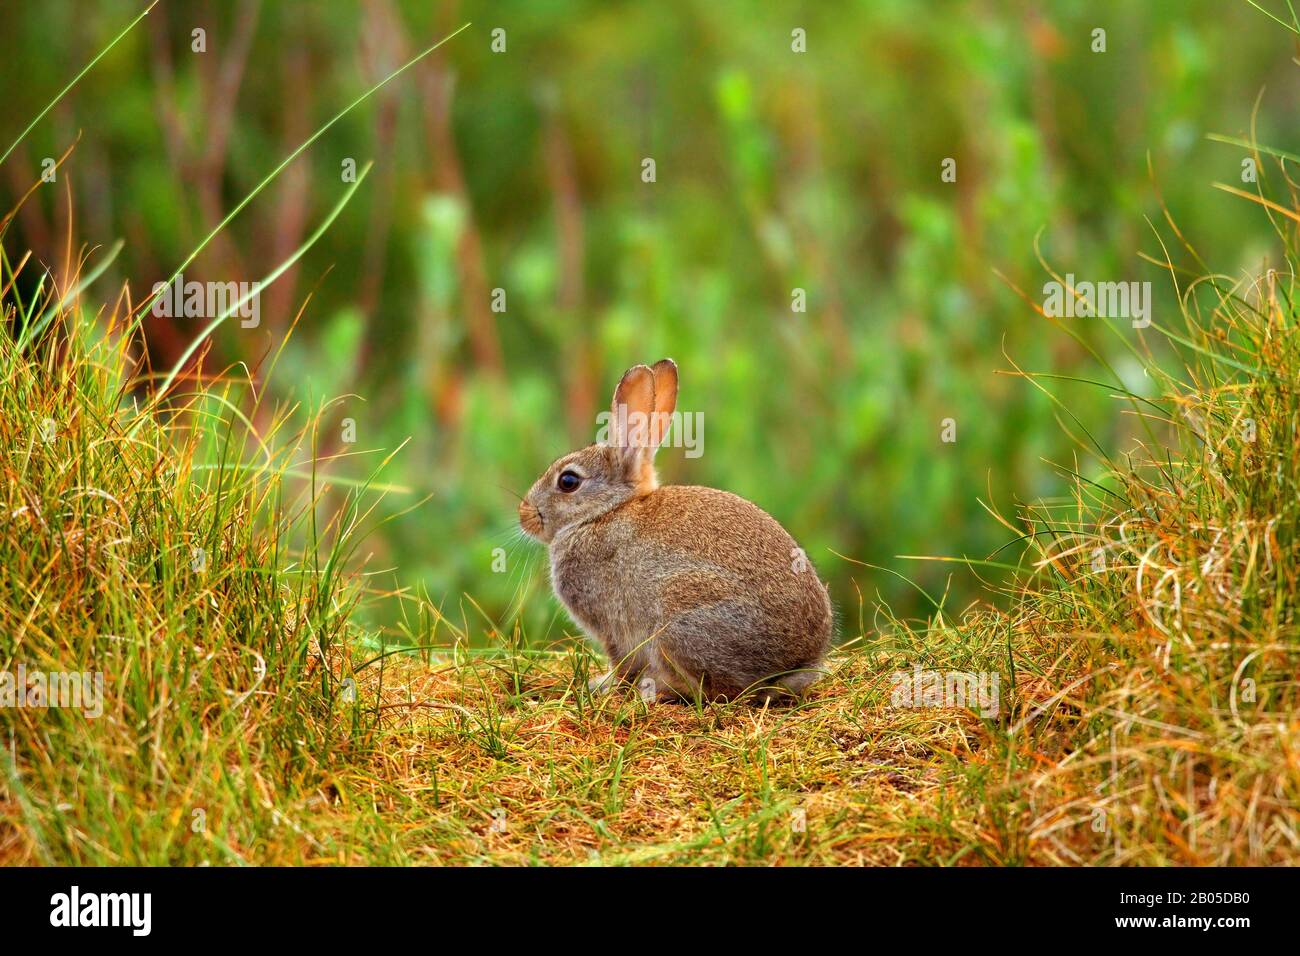 European rabbit (Oryctolagus cuniculus), sitting, side view, Germany, Lower Saxony, Norderney Stock Photo